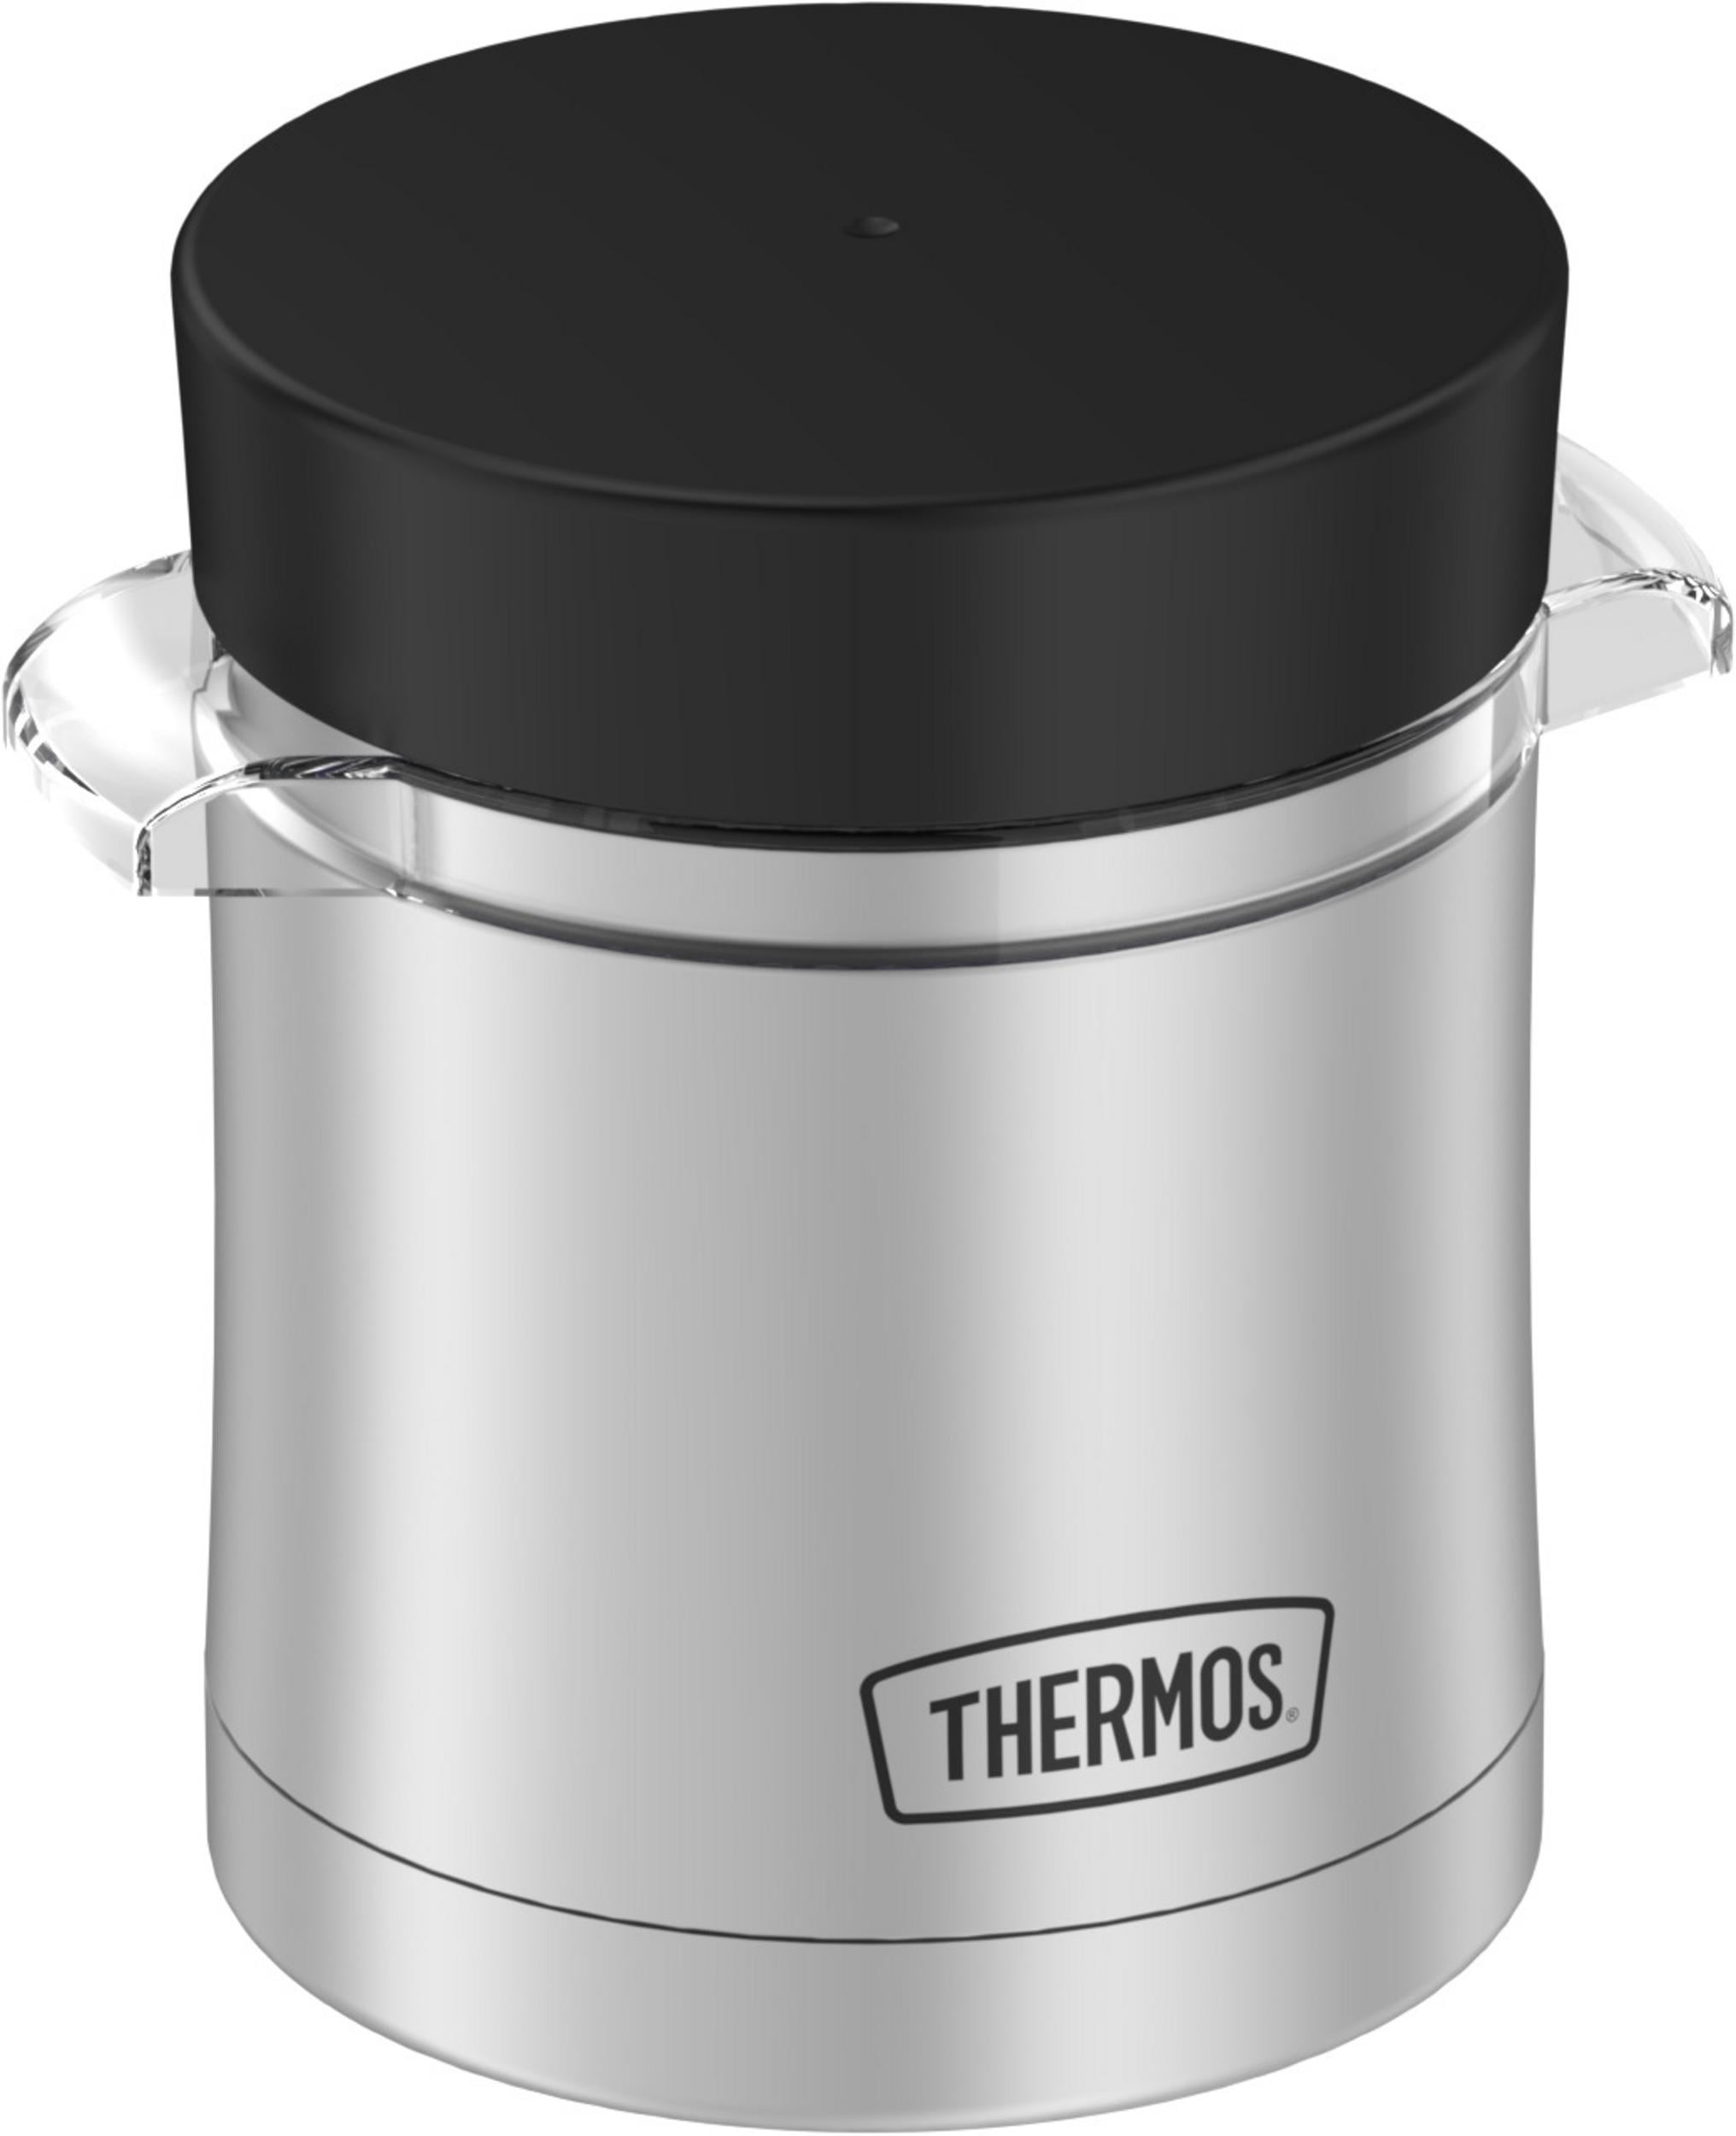 Immekey 34 OZ1LVacuum Thermos with Celsius Temperature Display Lid, 48 Hour Heat Retention,Green, Size: 1.3 Large